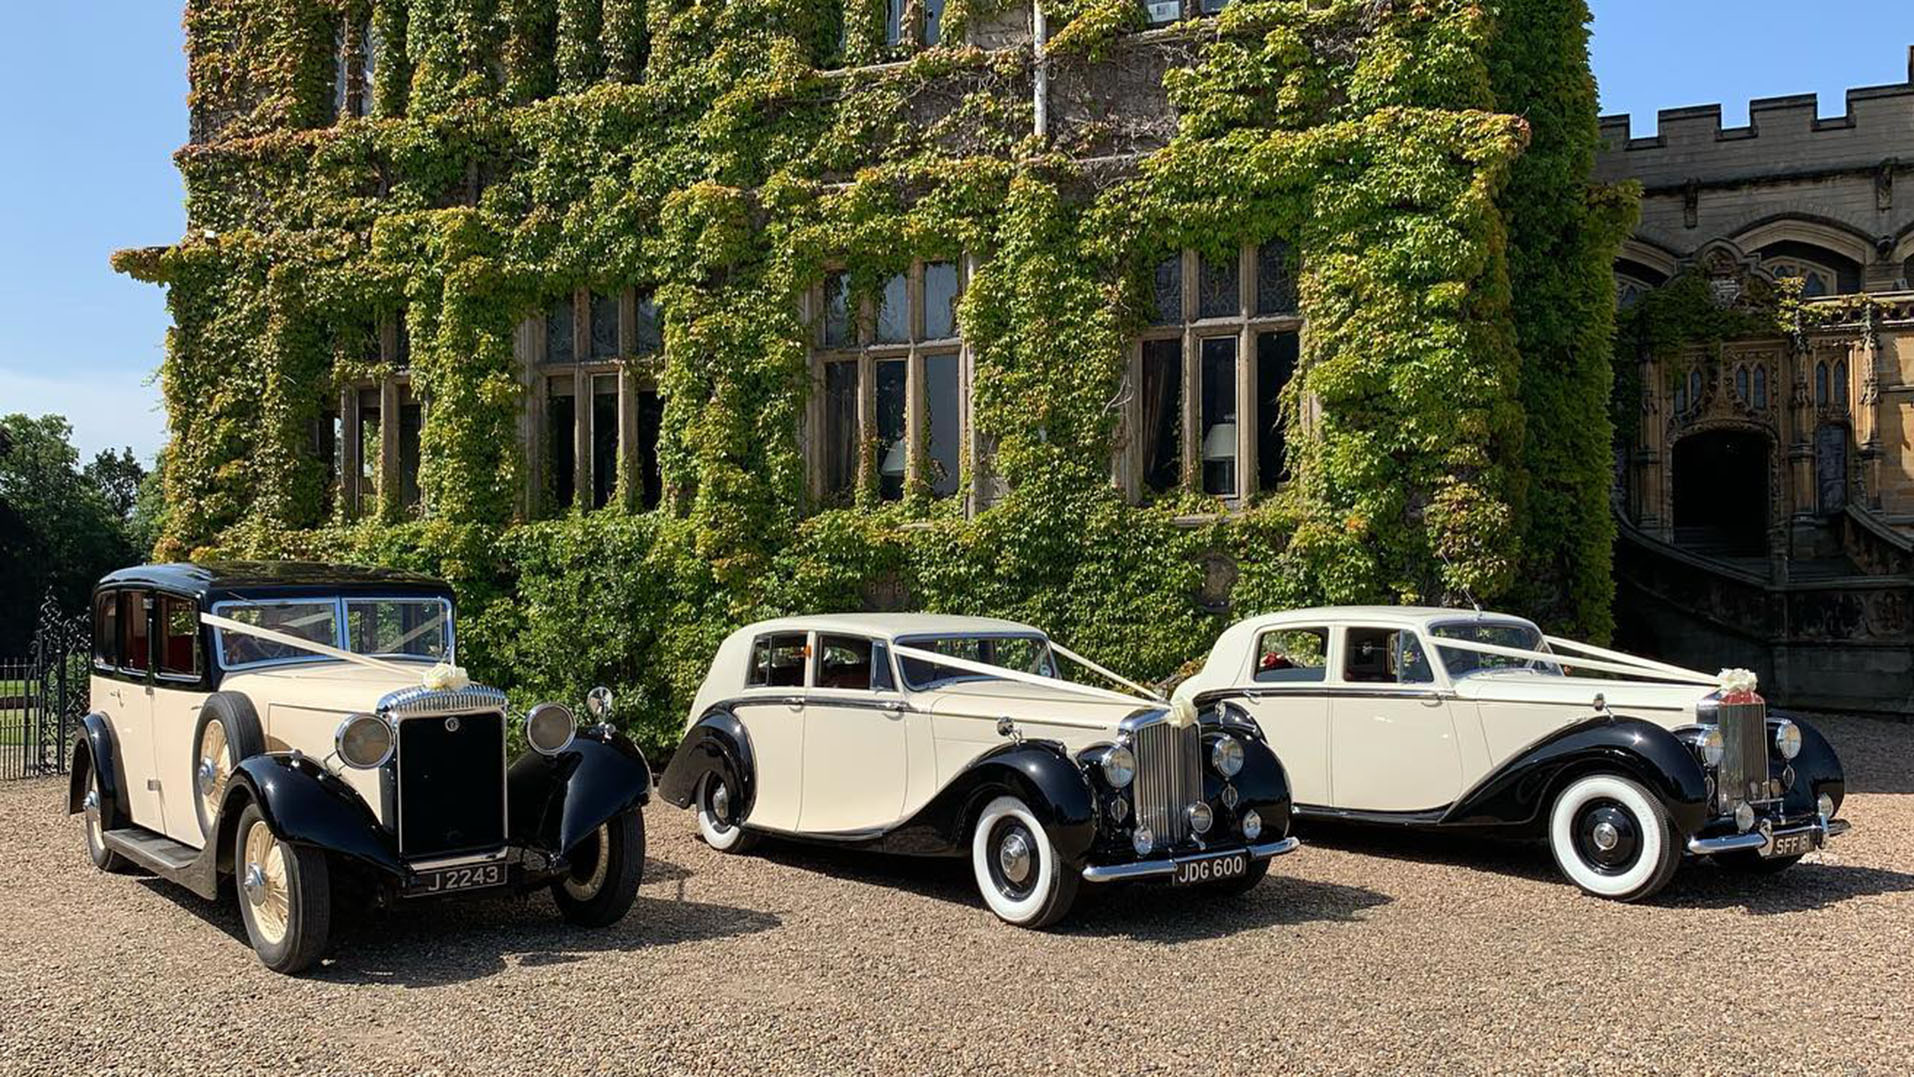 Matching Black & Ivory Vintage Daimler with a Classic Bentley and Rolls-Royce on wedding duties in Yorkshire